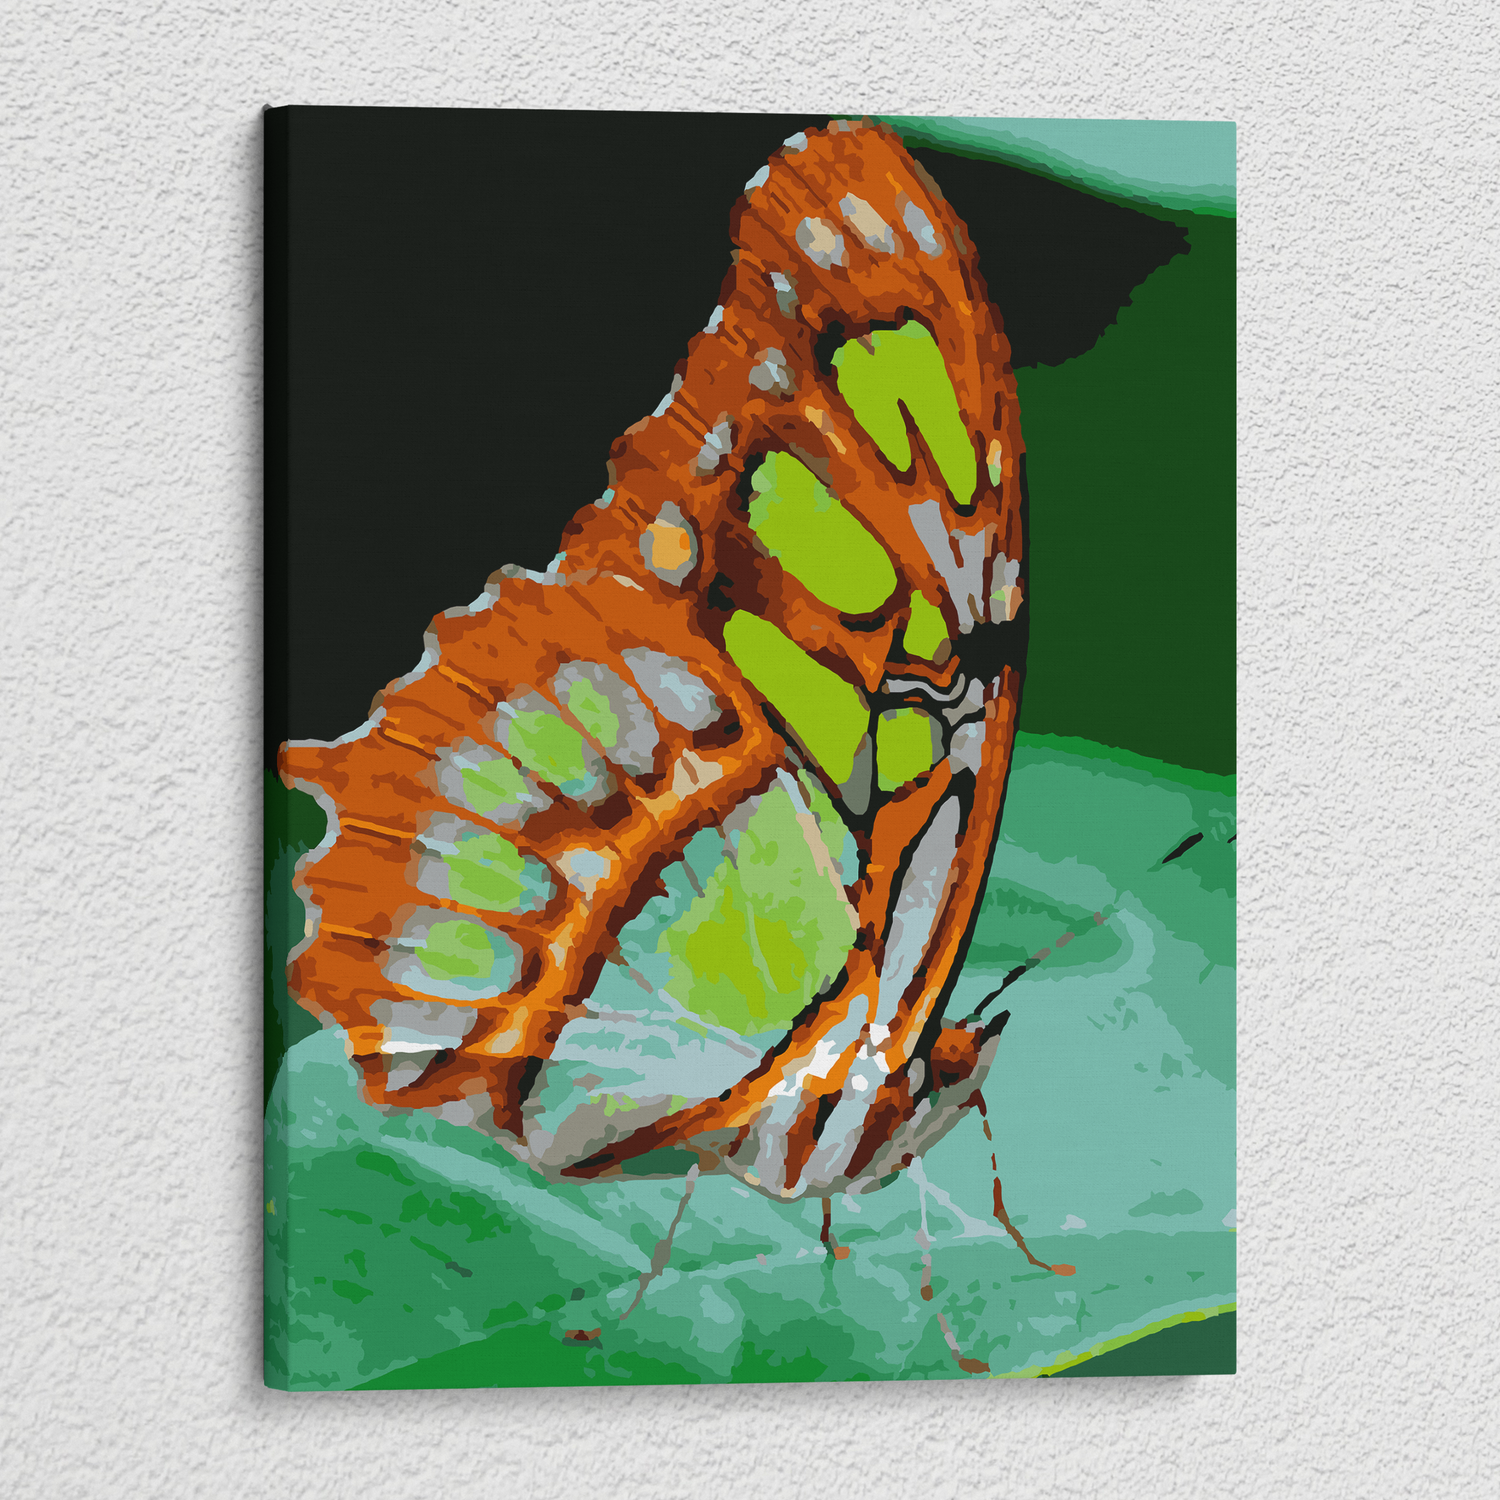 Butterfly on a Leaf - Paint By Numbers Kit